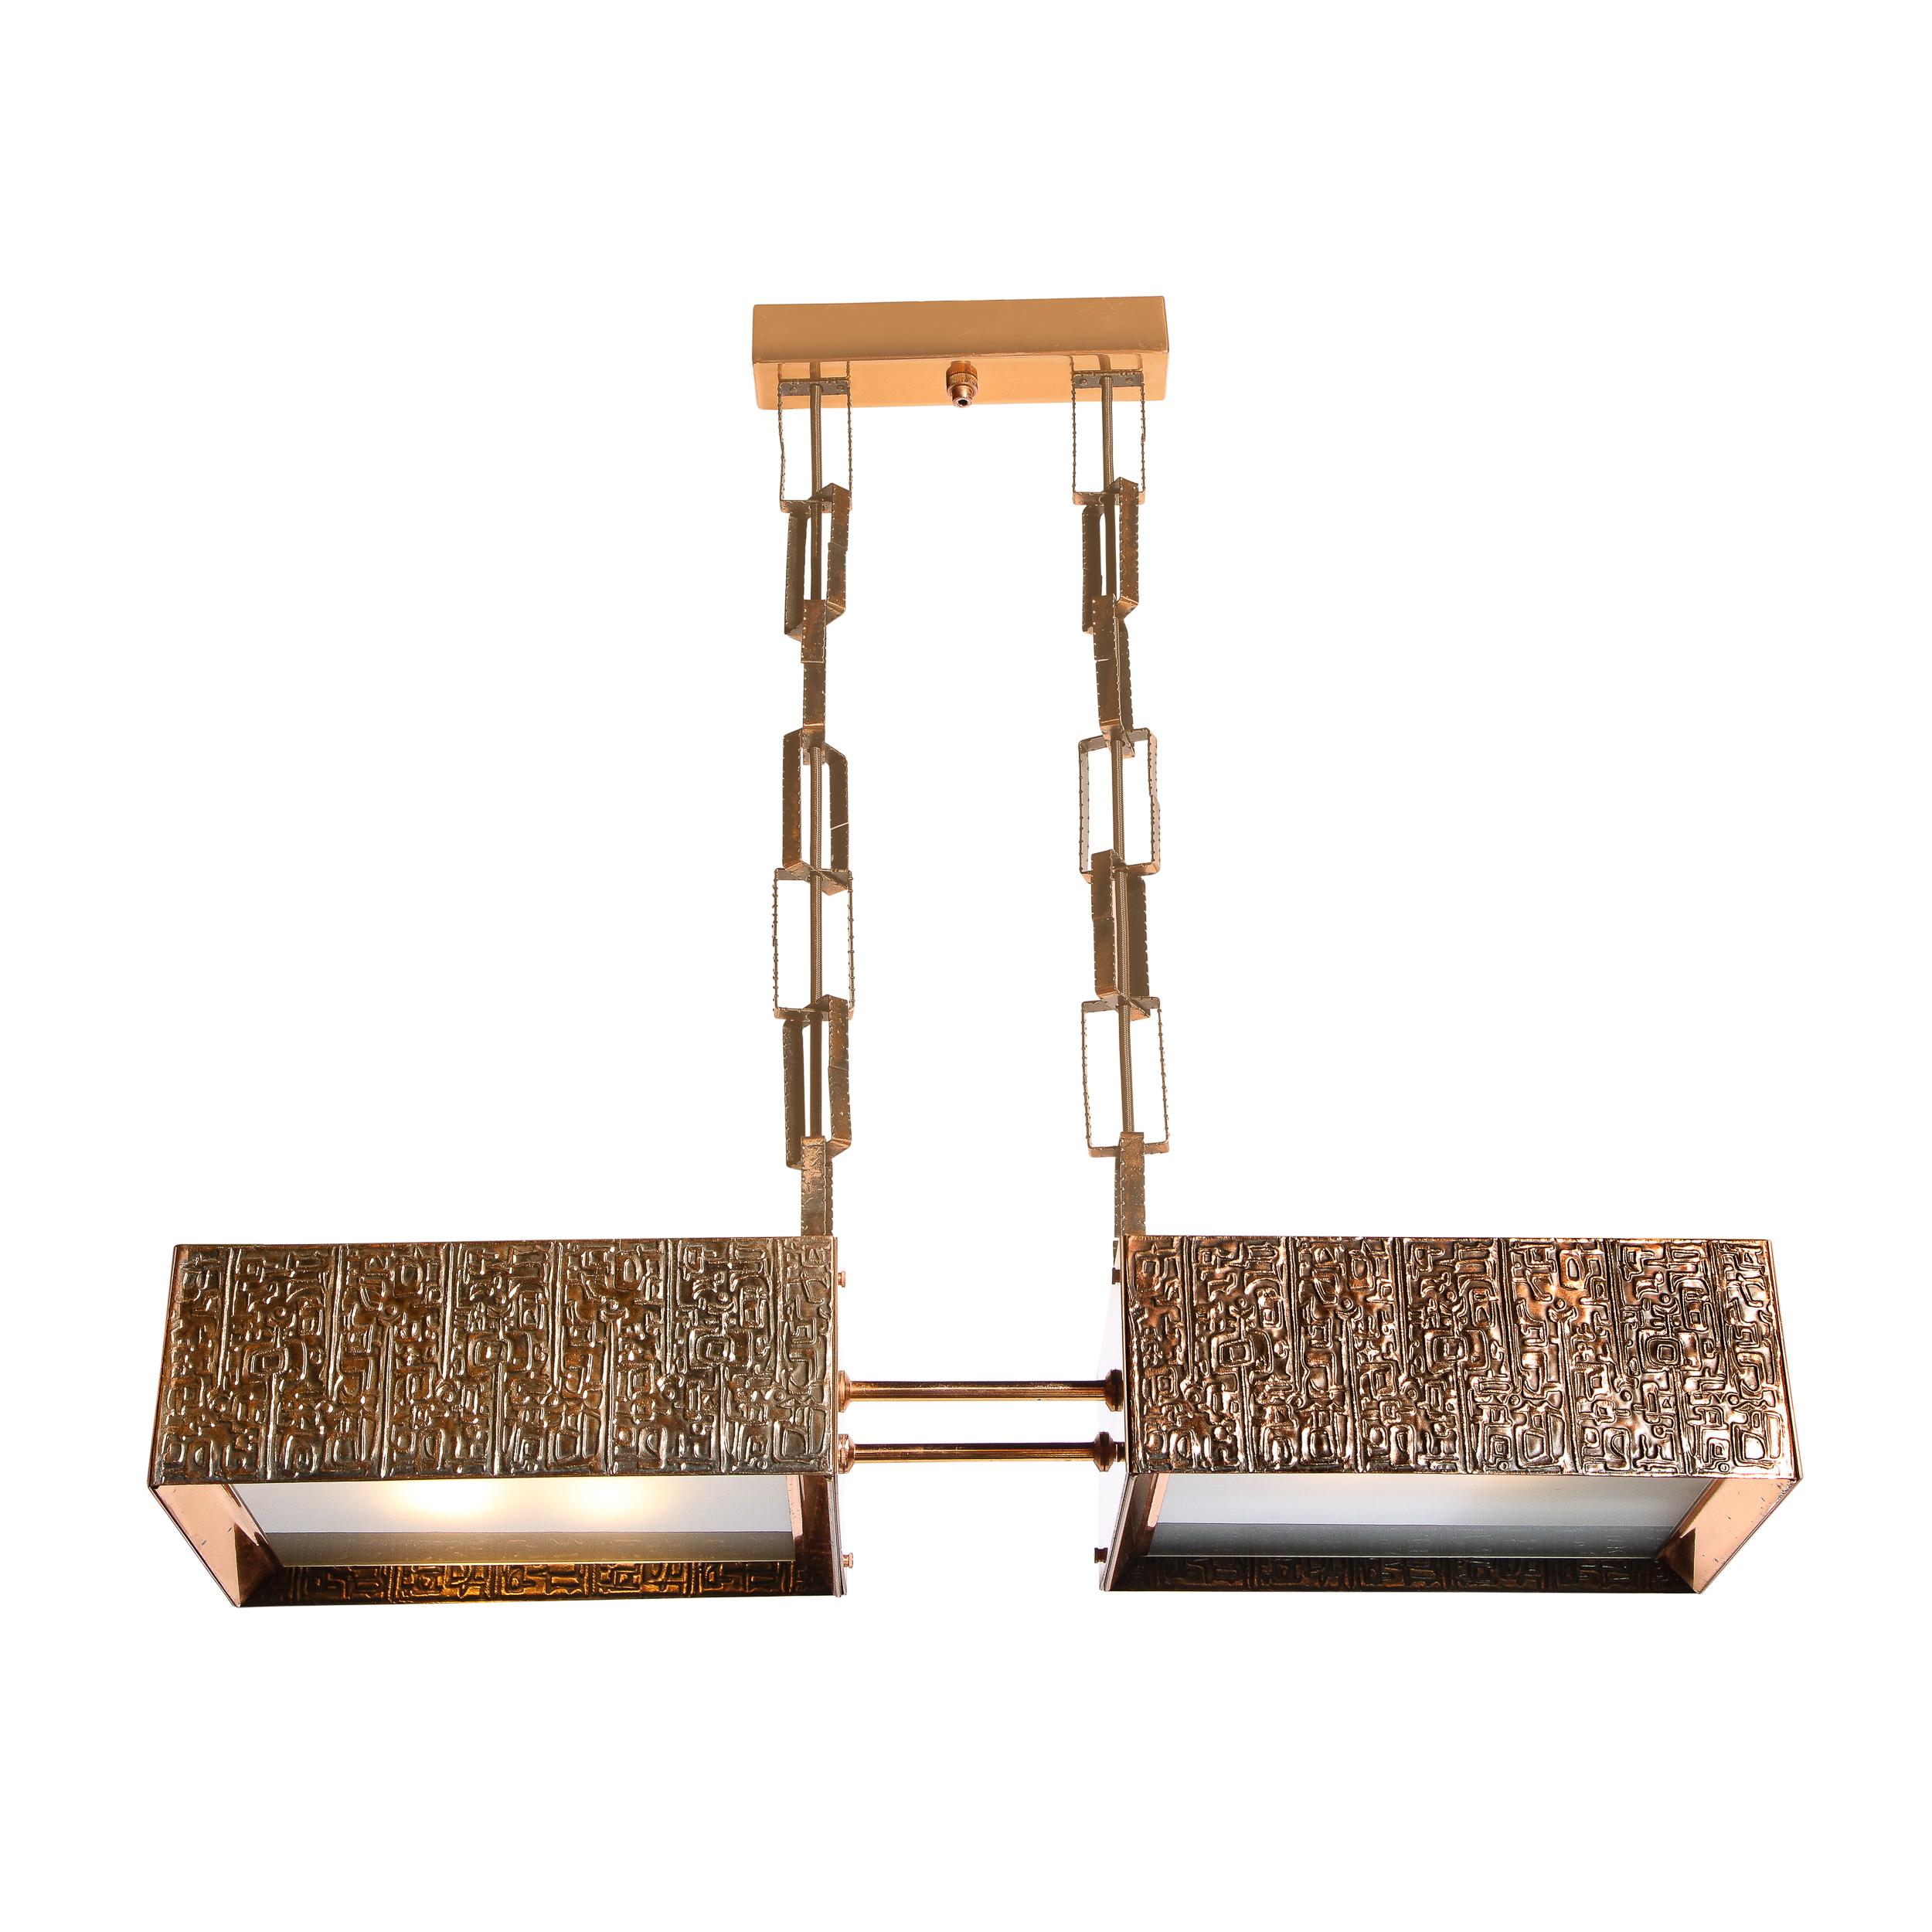 This stunning and exceedingly rare brutalist chandelier was realized in Hungary circa 1970. It features two volumetric rectangular forms adjoined by cylindrical supports all in copper. The sides of the chandelier are inscribed with brutalist glyphic